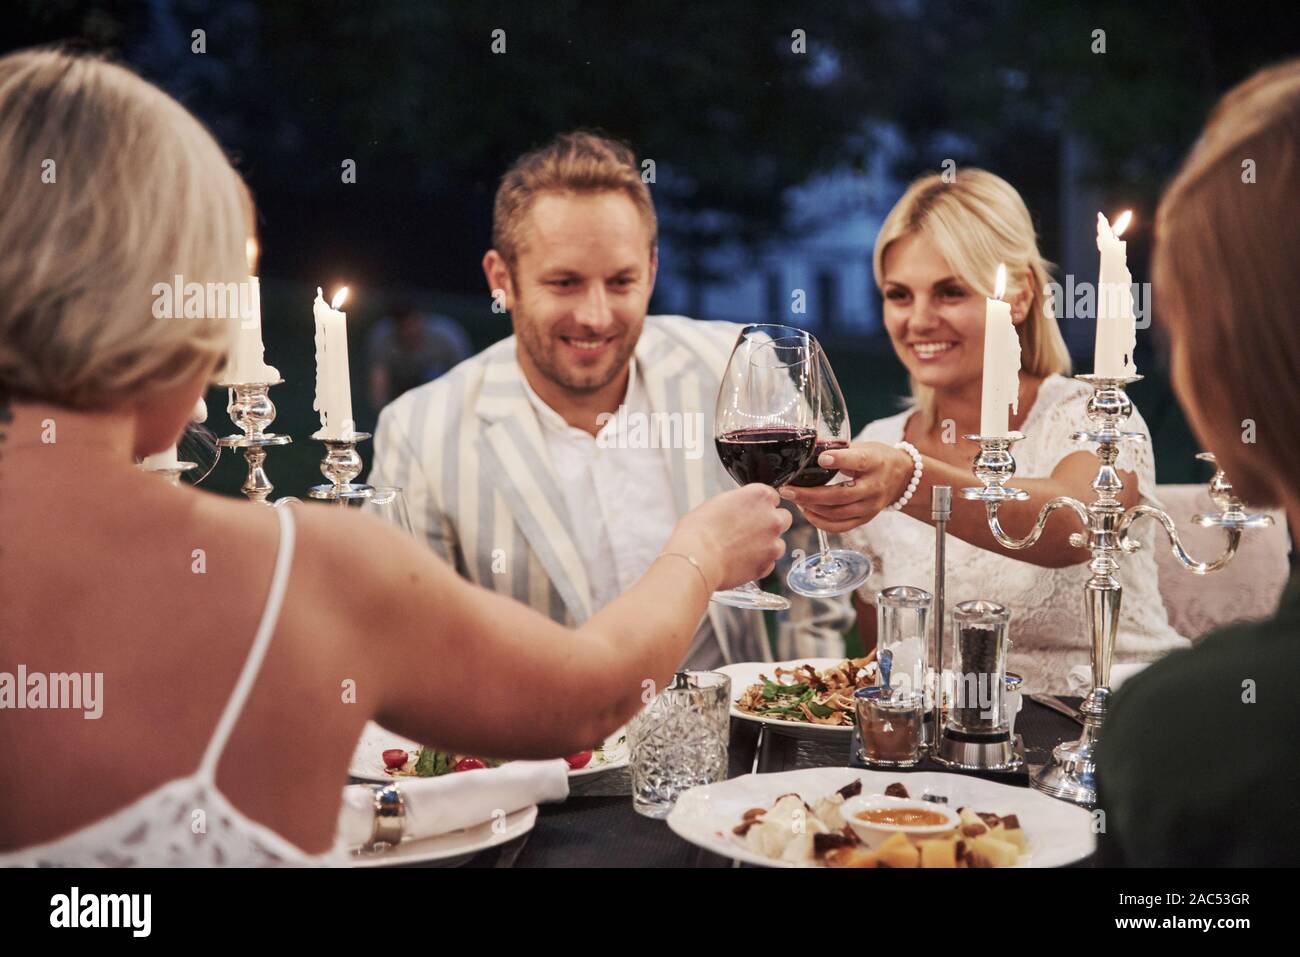 Knocking the glasses with wine. Group of friends in the elegant wear have luxury dinner Stock Photo